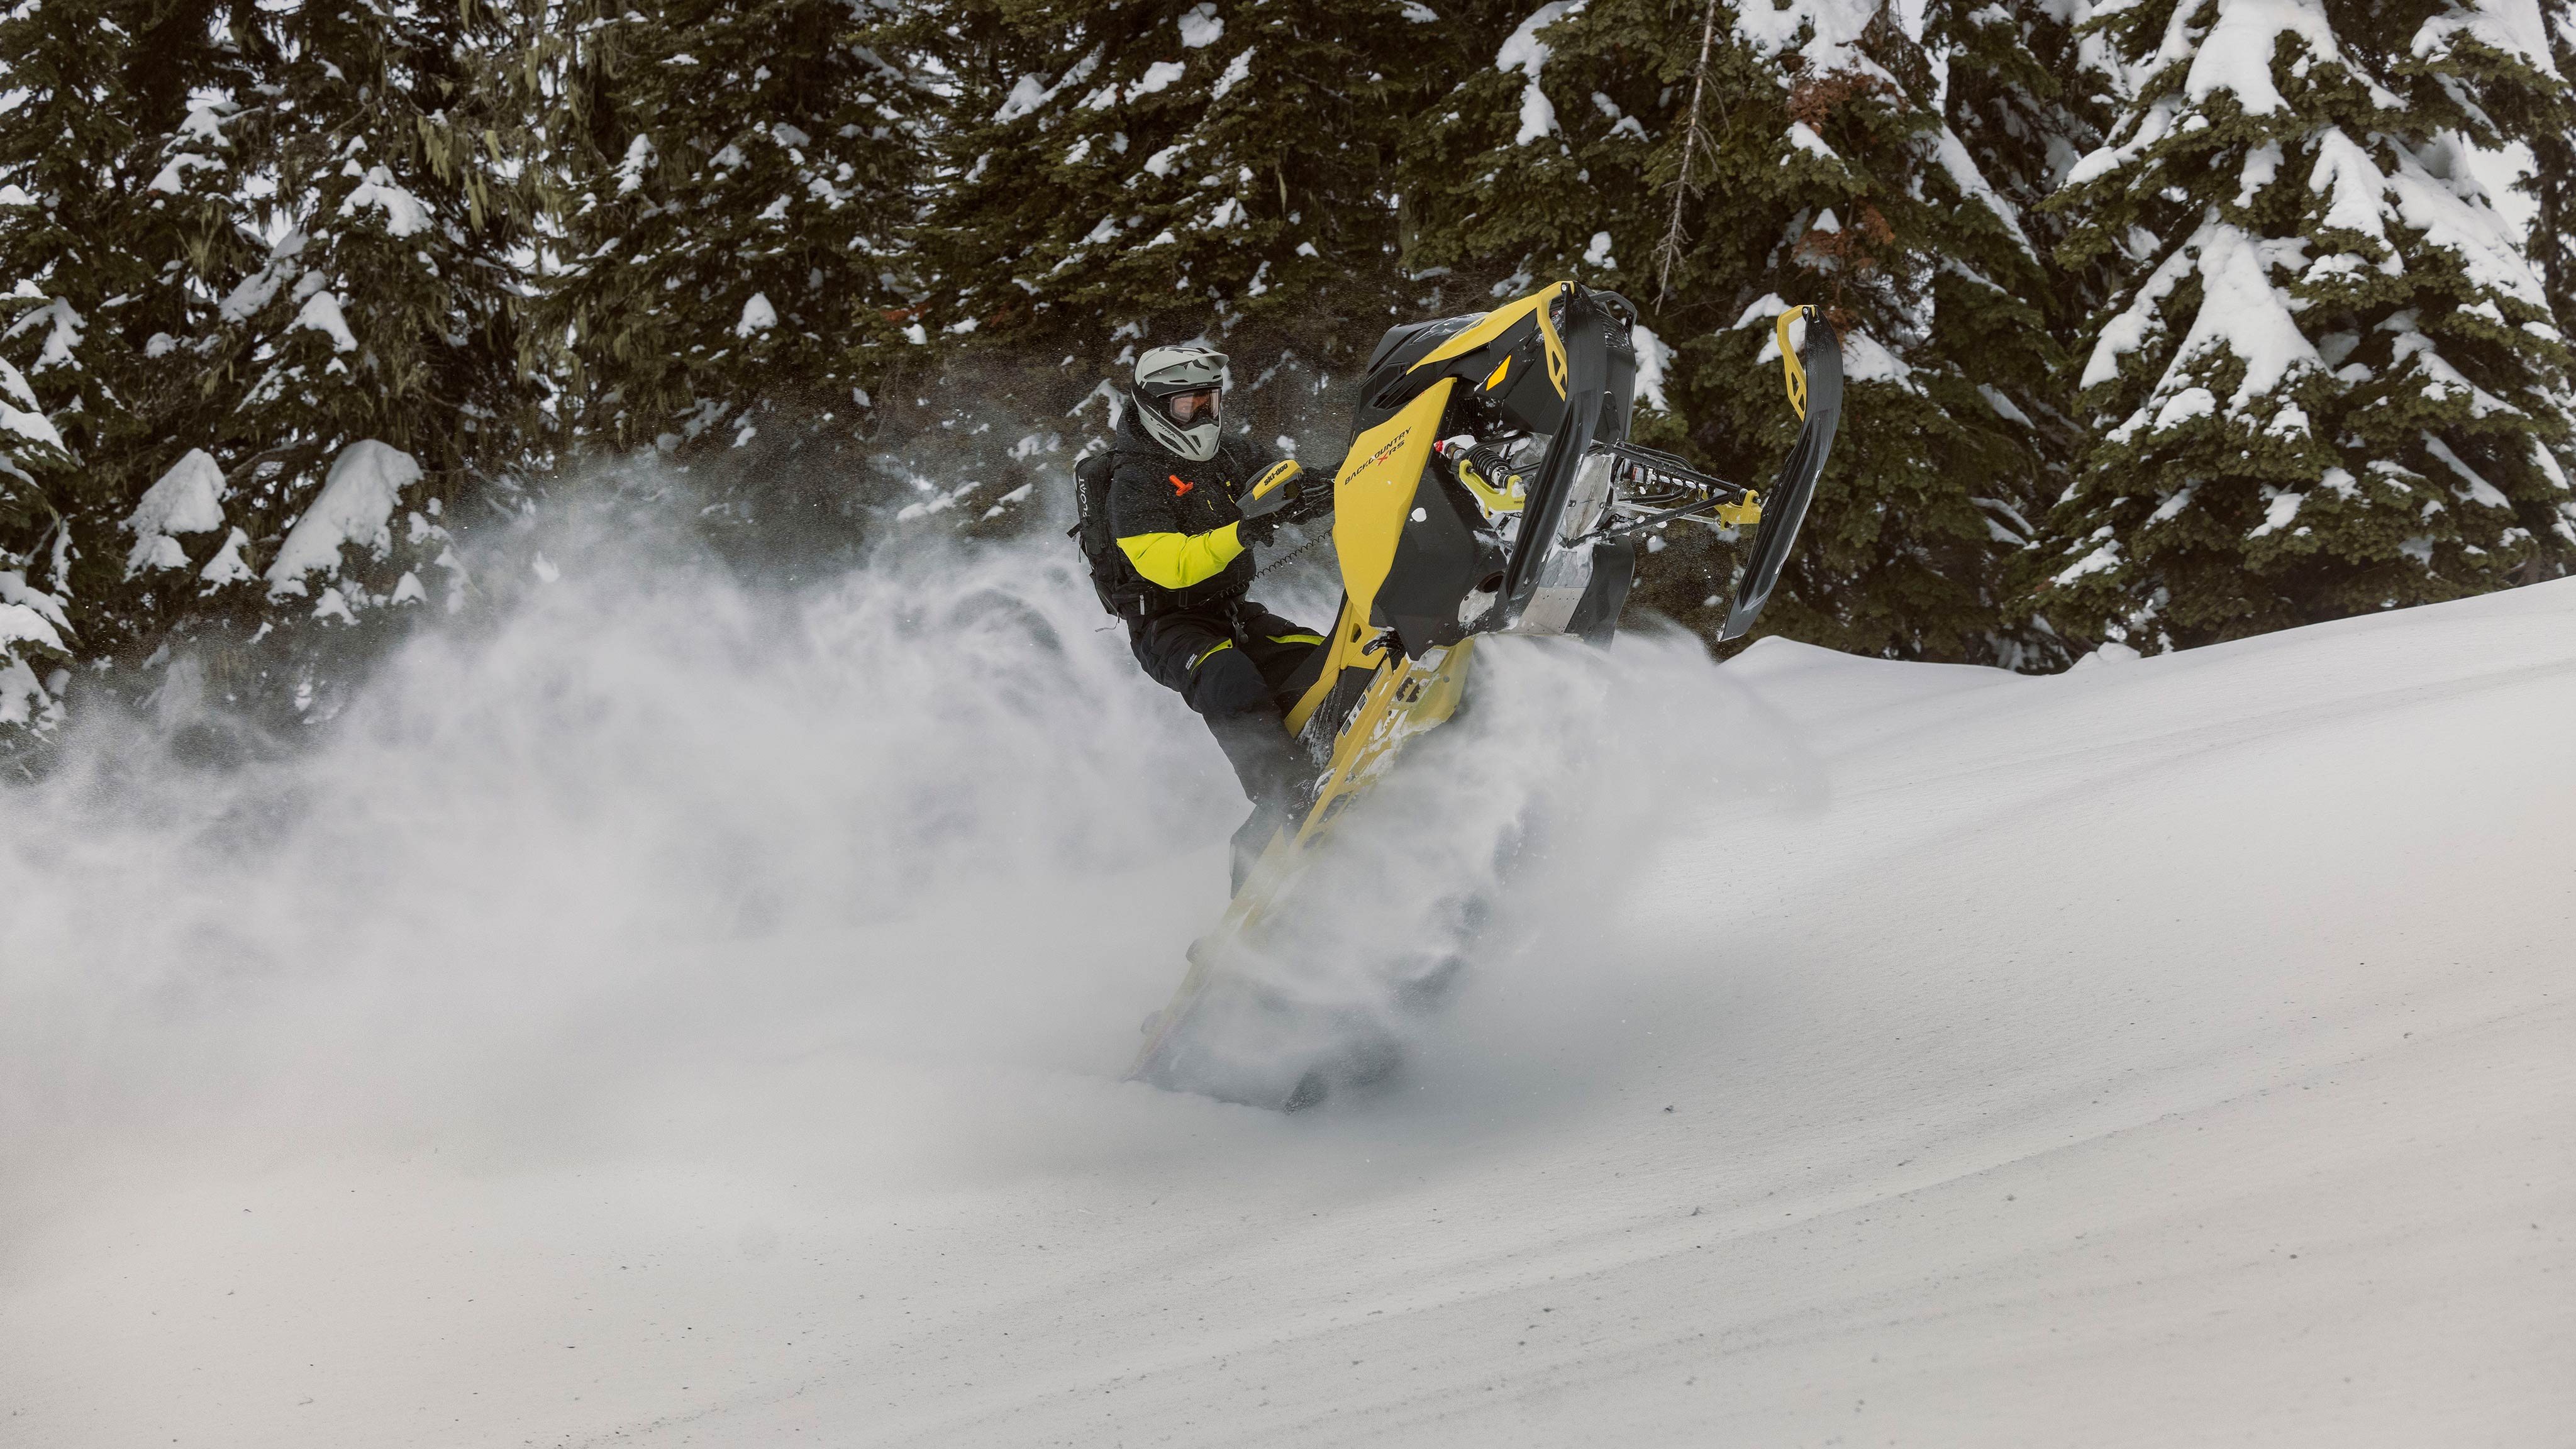 Rider pulling off a trick on a Ski-Doo Backcountry crossover snowmobile in deep snow